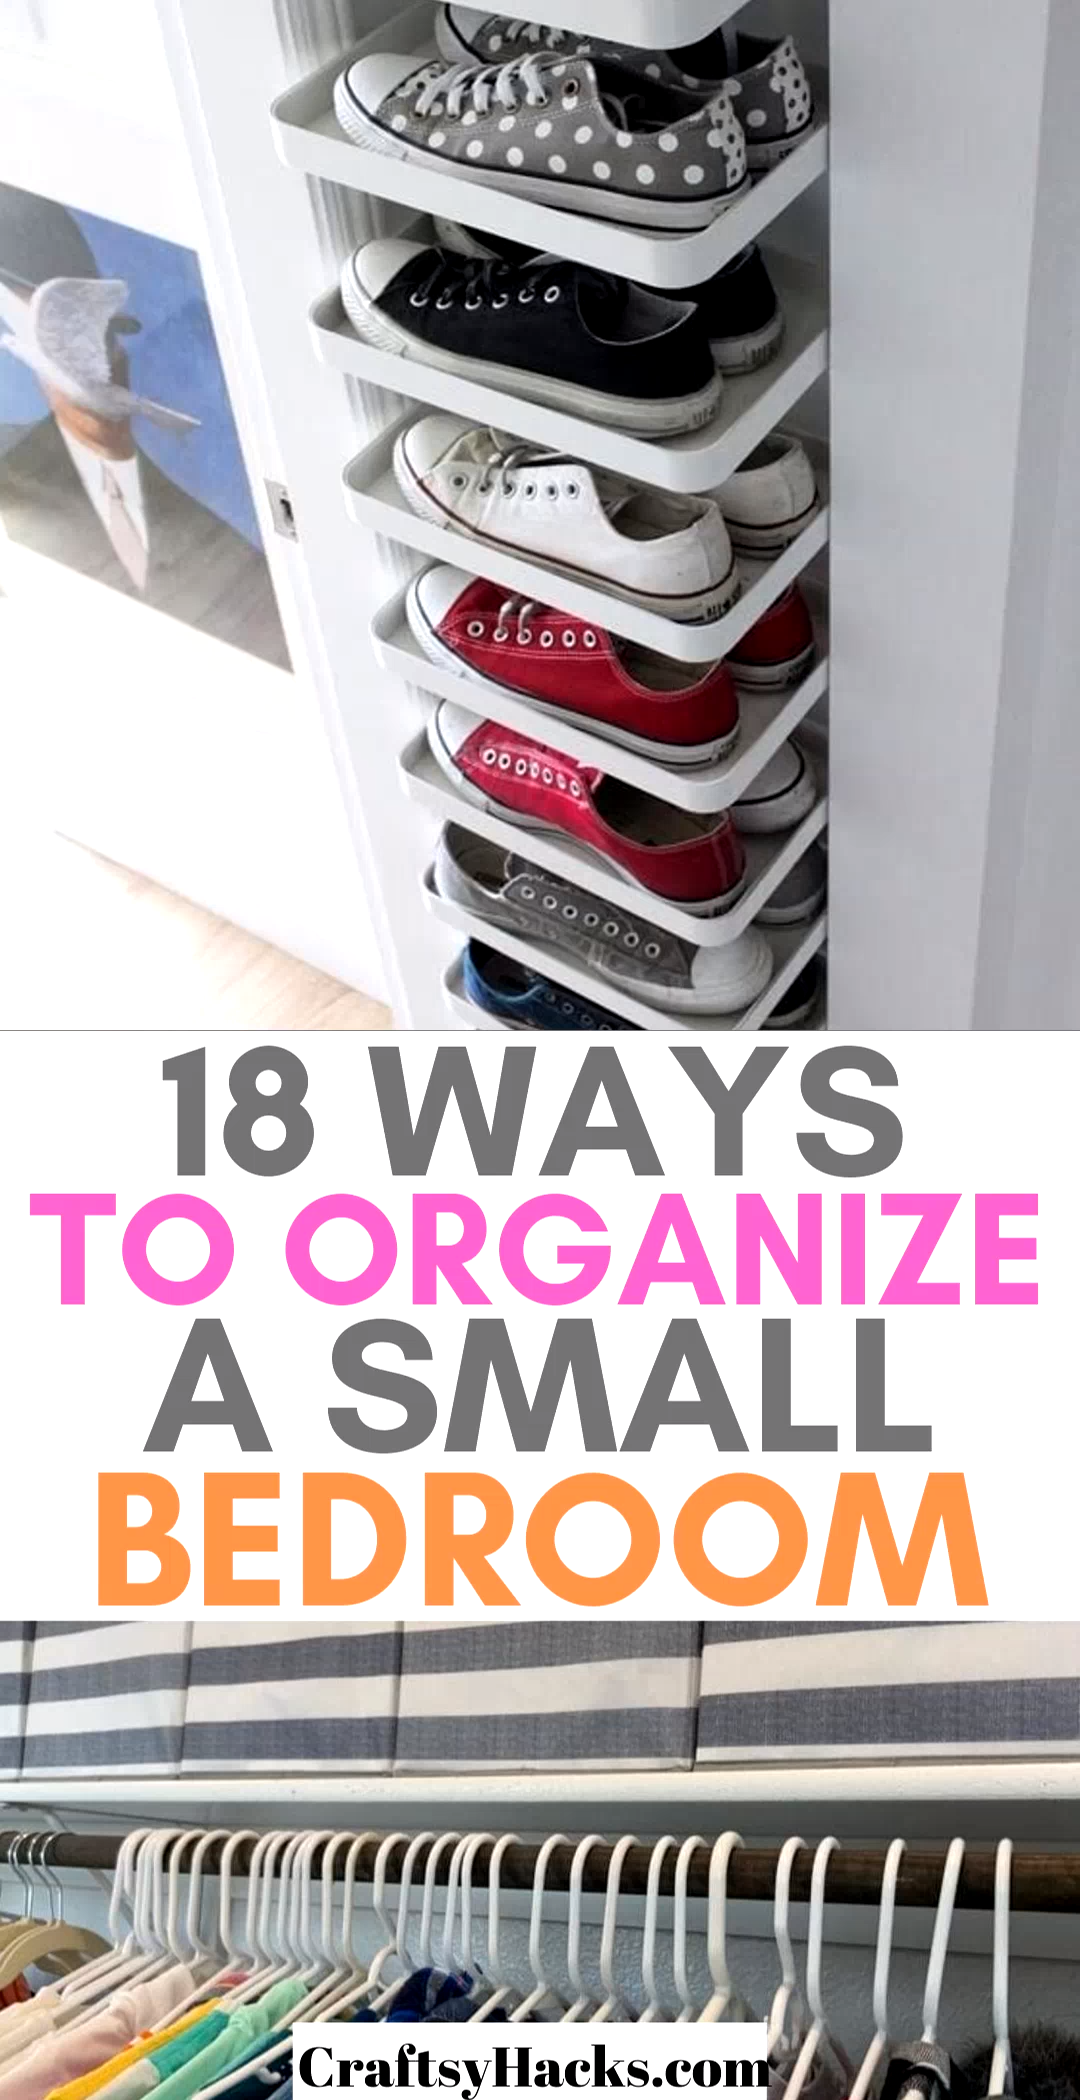 18 Ways to Organize a Small Bedroom - 18 Ways to Organize a Small Bedroom -   19 diy Organization hacks ideas